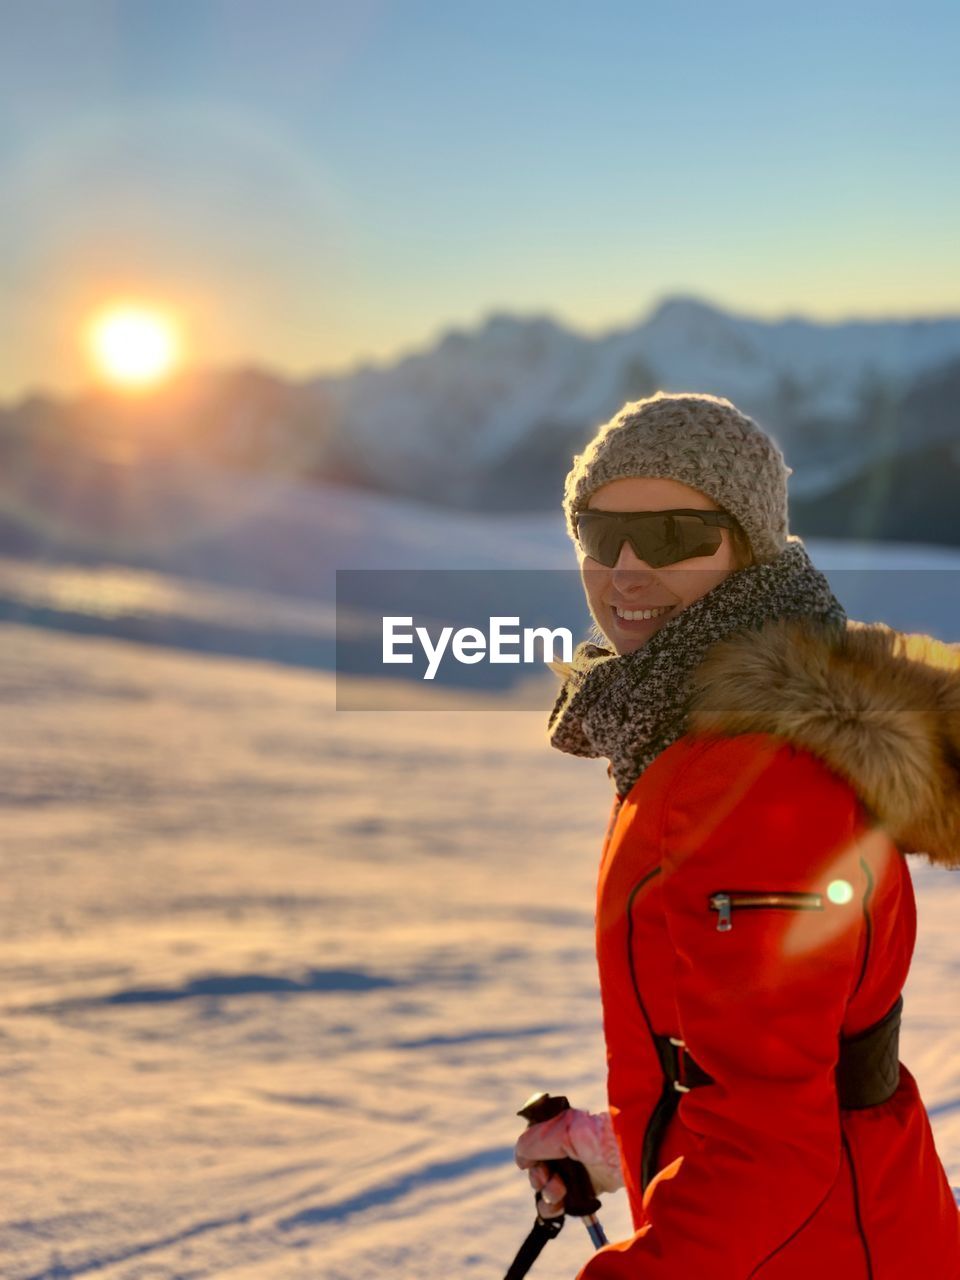 Portrait of woman skiing on snow against sky during sunset